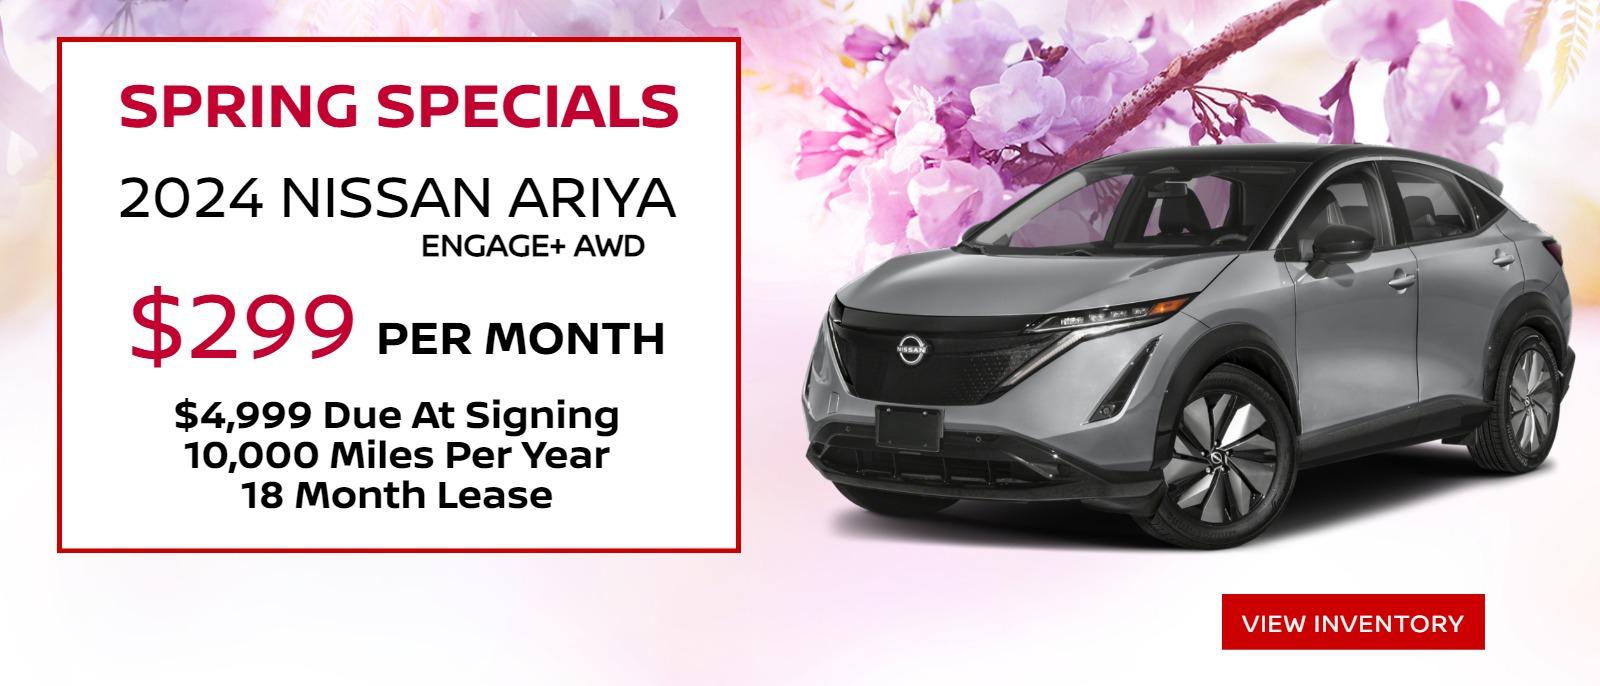 2024 NISSAN ARIYA ENGAGE PLUS AWD STOCK # 24152
MSRP: $47,720
$5,000 DOWN
$299 PER MONTH
18 MONTH LEASE/ 10K PER YEAR
Selling Price $45,720